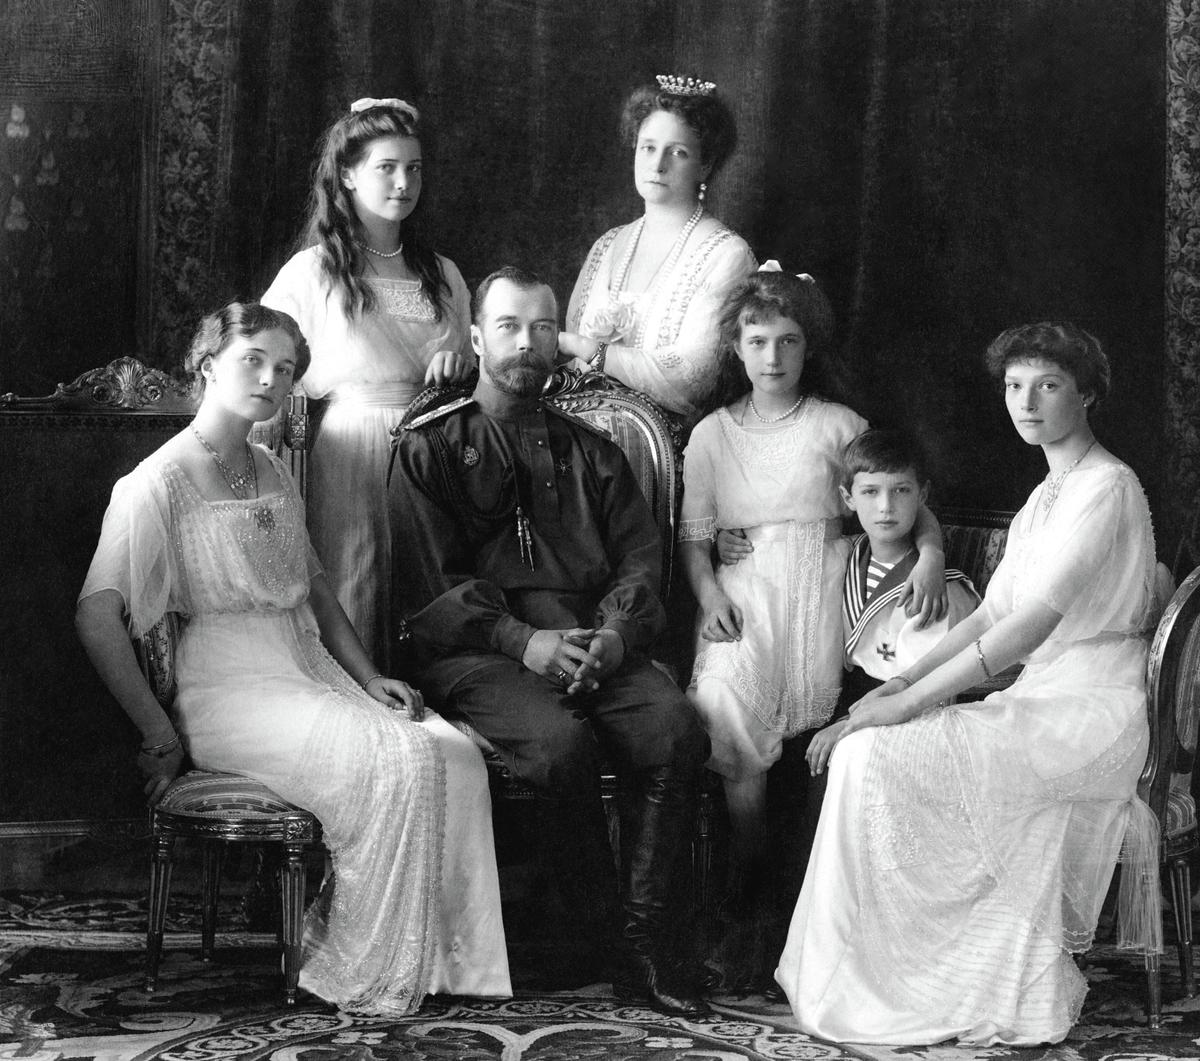 Czar Nicholas II in 1913 with his empress, Alexandra, and their children. In 1918, they were murdered by their communist captors. (Public Domain)